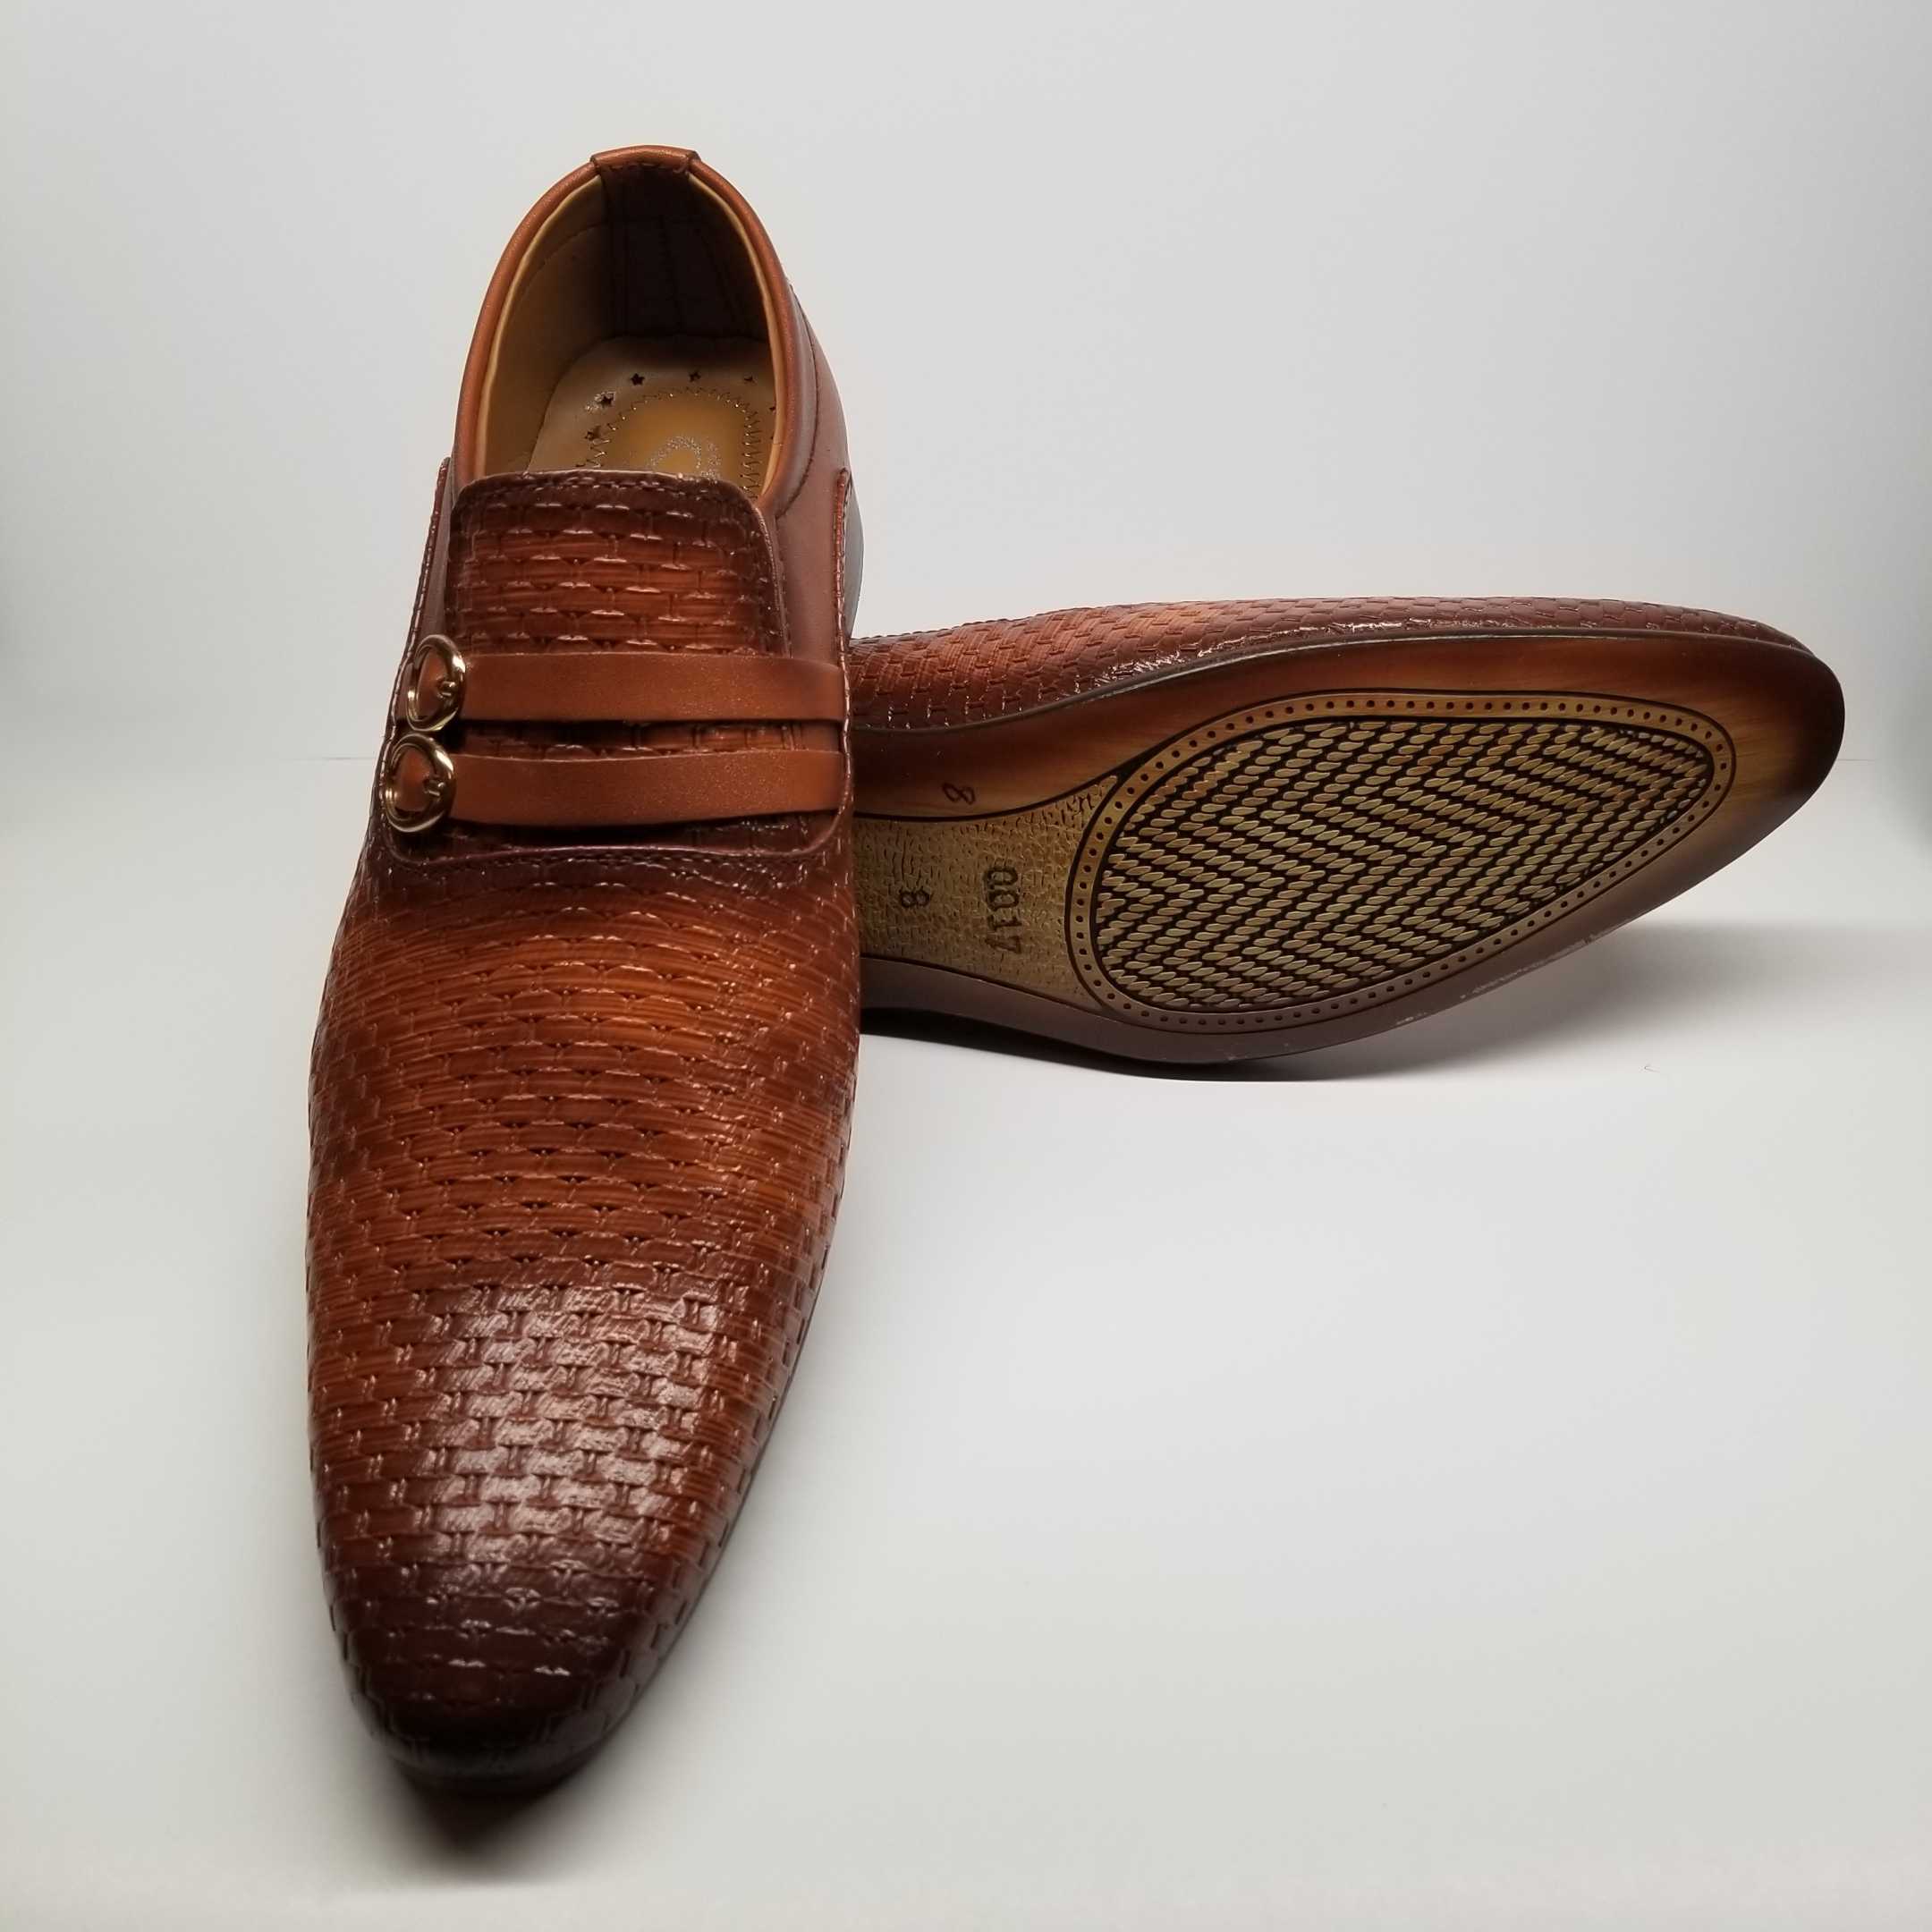 Stature dress shoes by SCS at NMFootwear.com